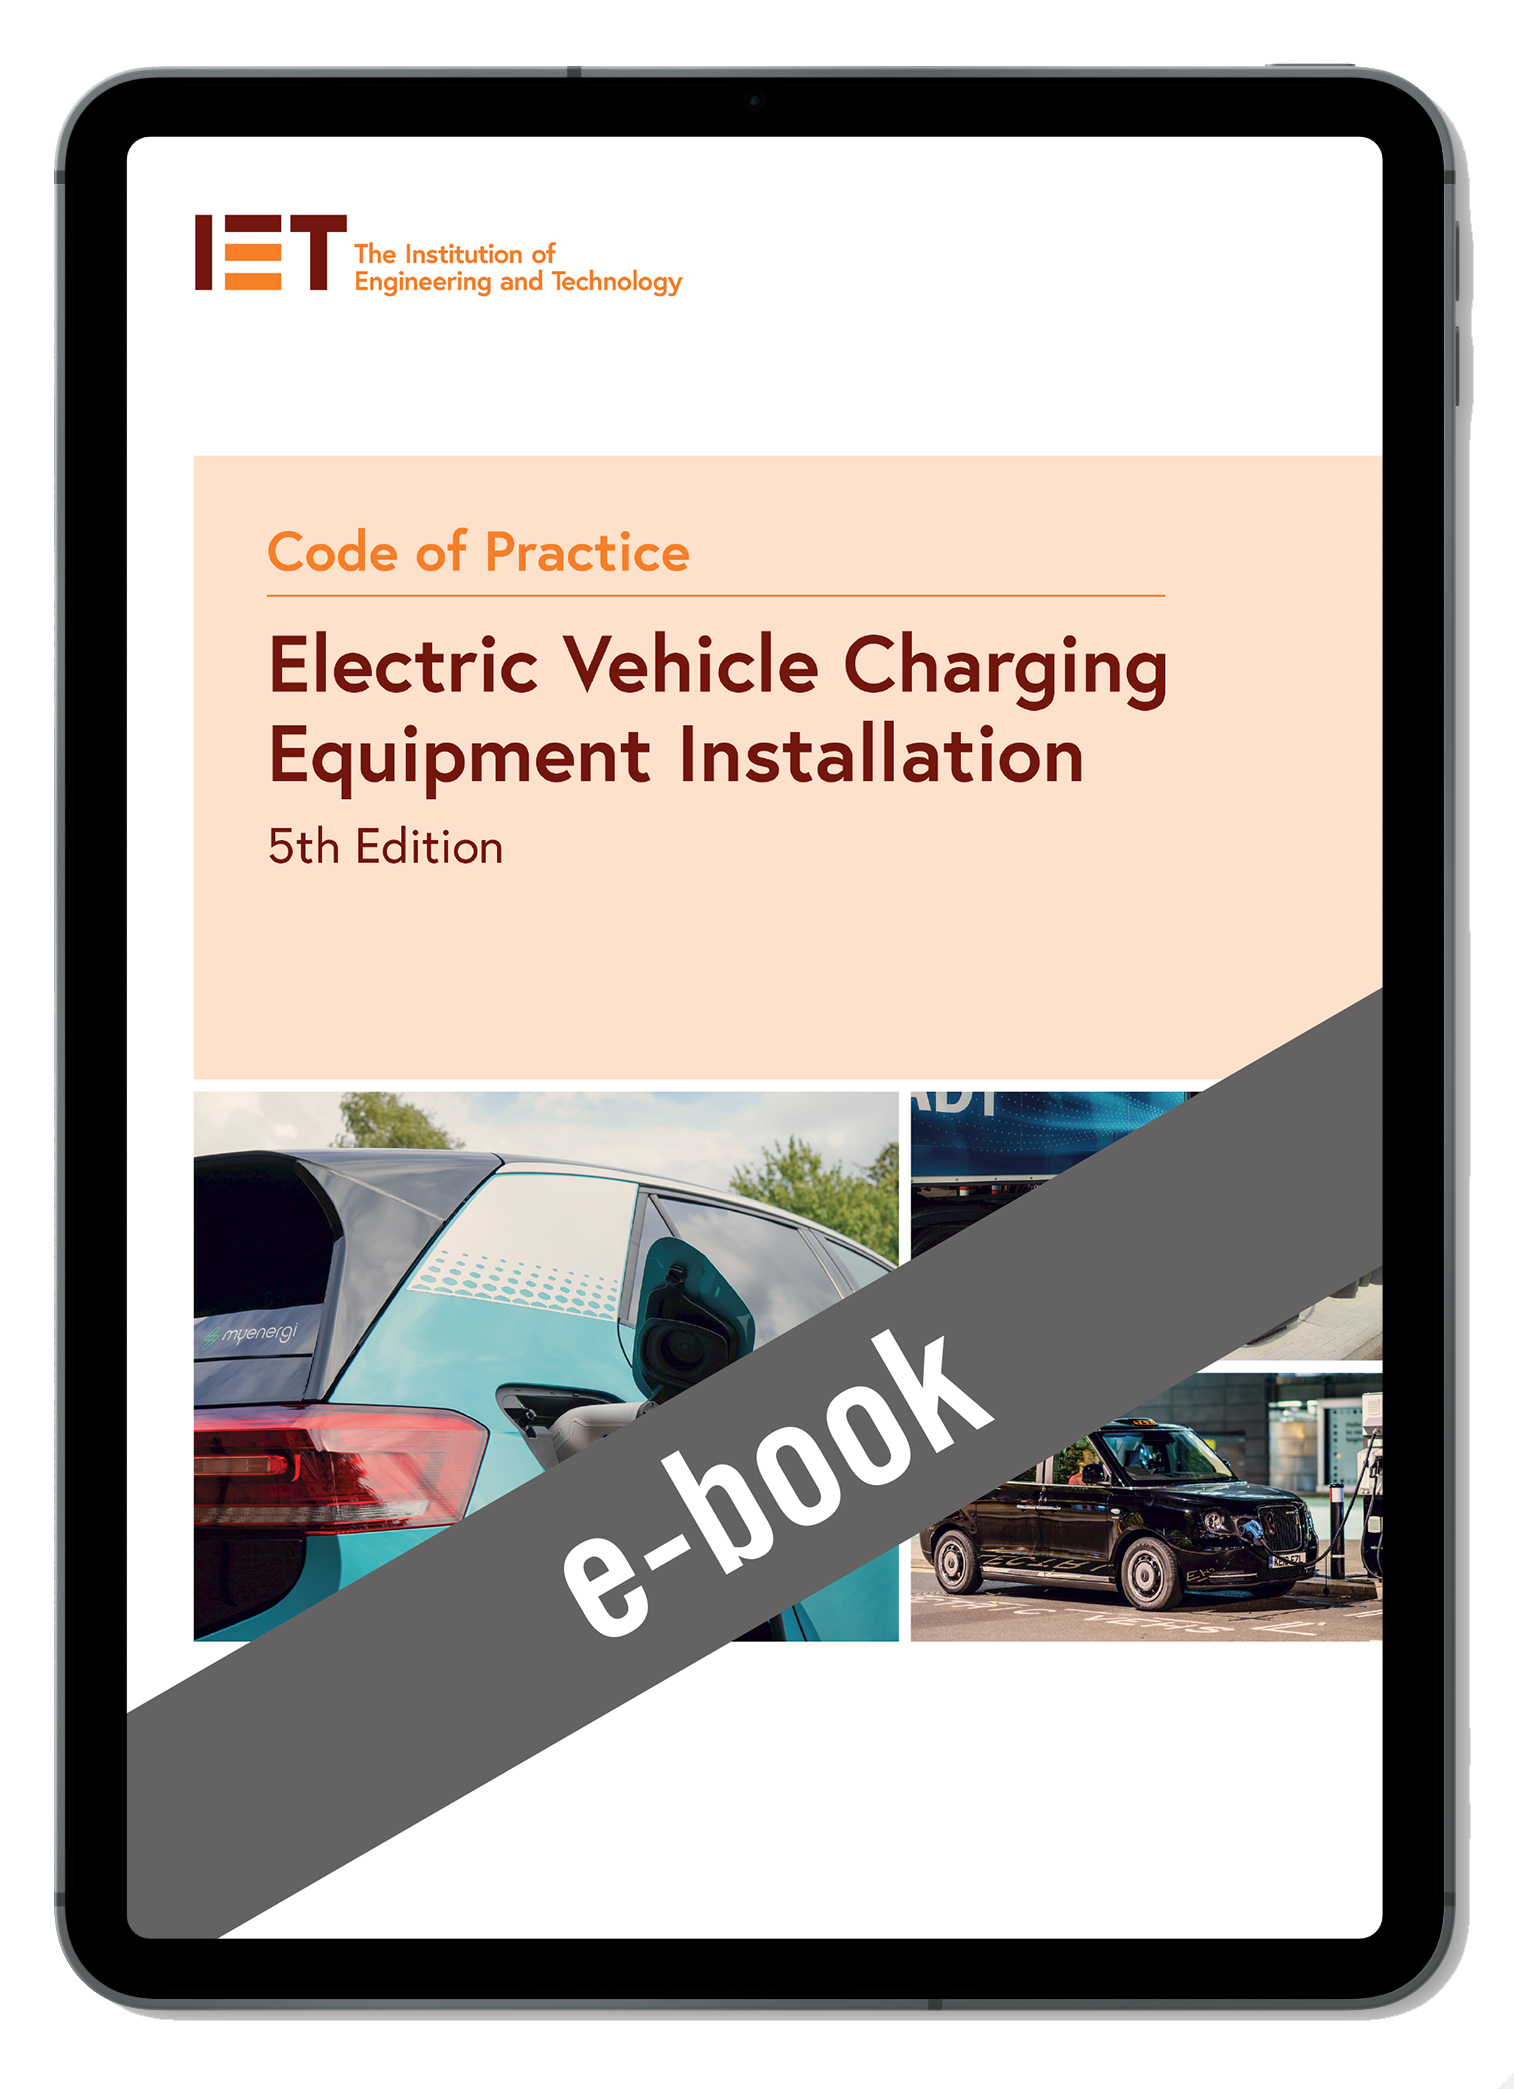 Code of Practice for Electric Vehicle Charging Equipment Installation, 5th Edition